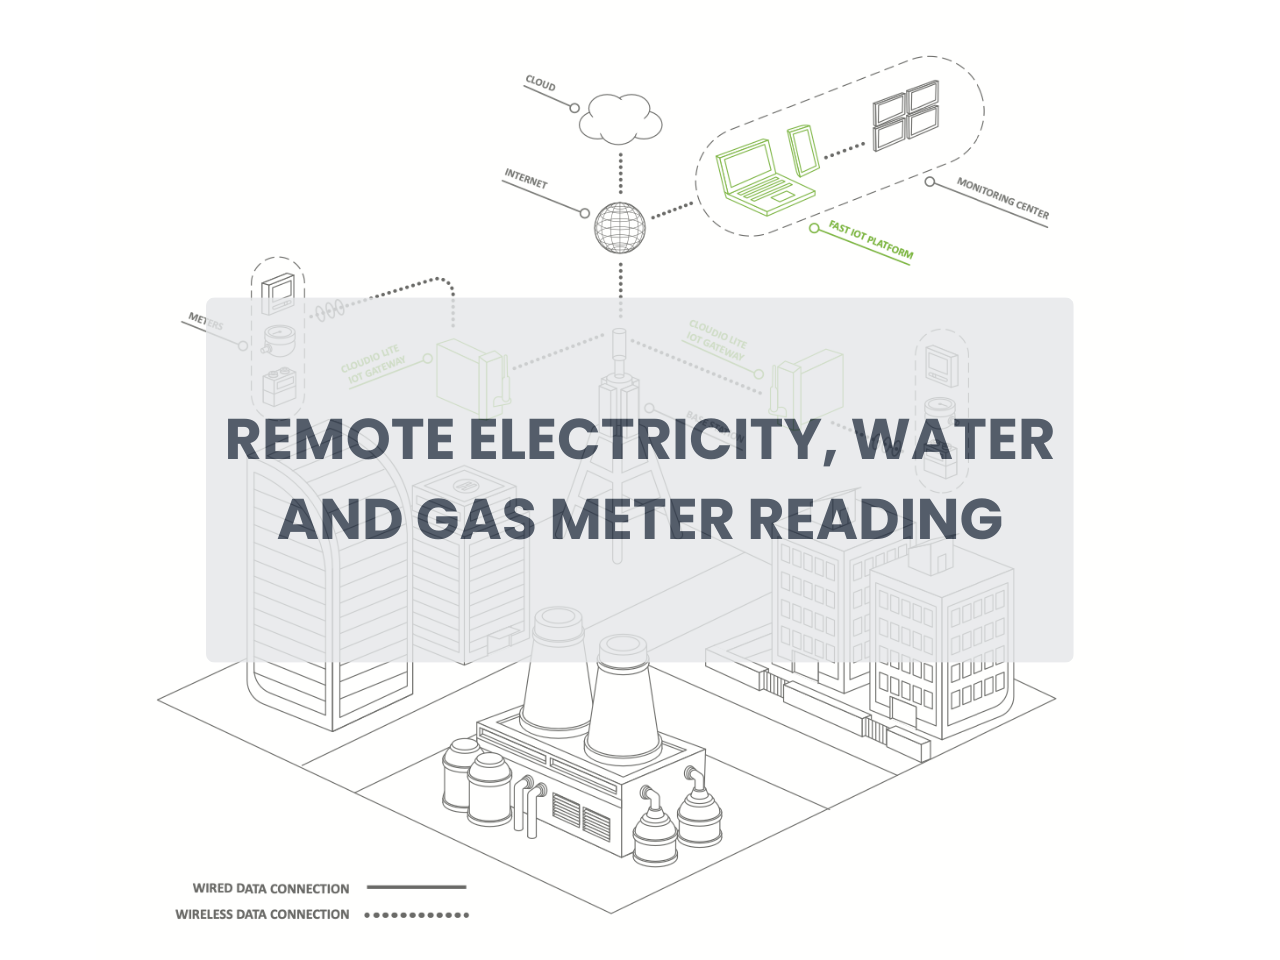 REMOTE ELECTRICITY, WATER AND GAS METER READING